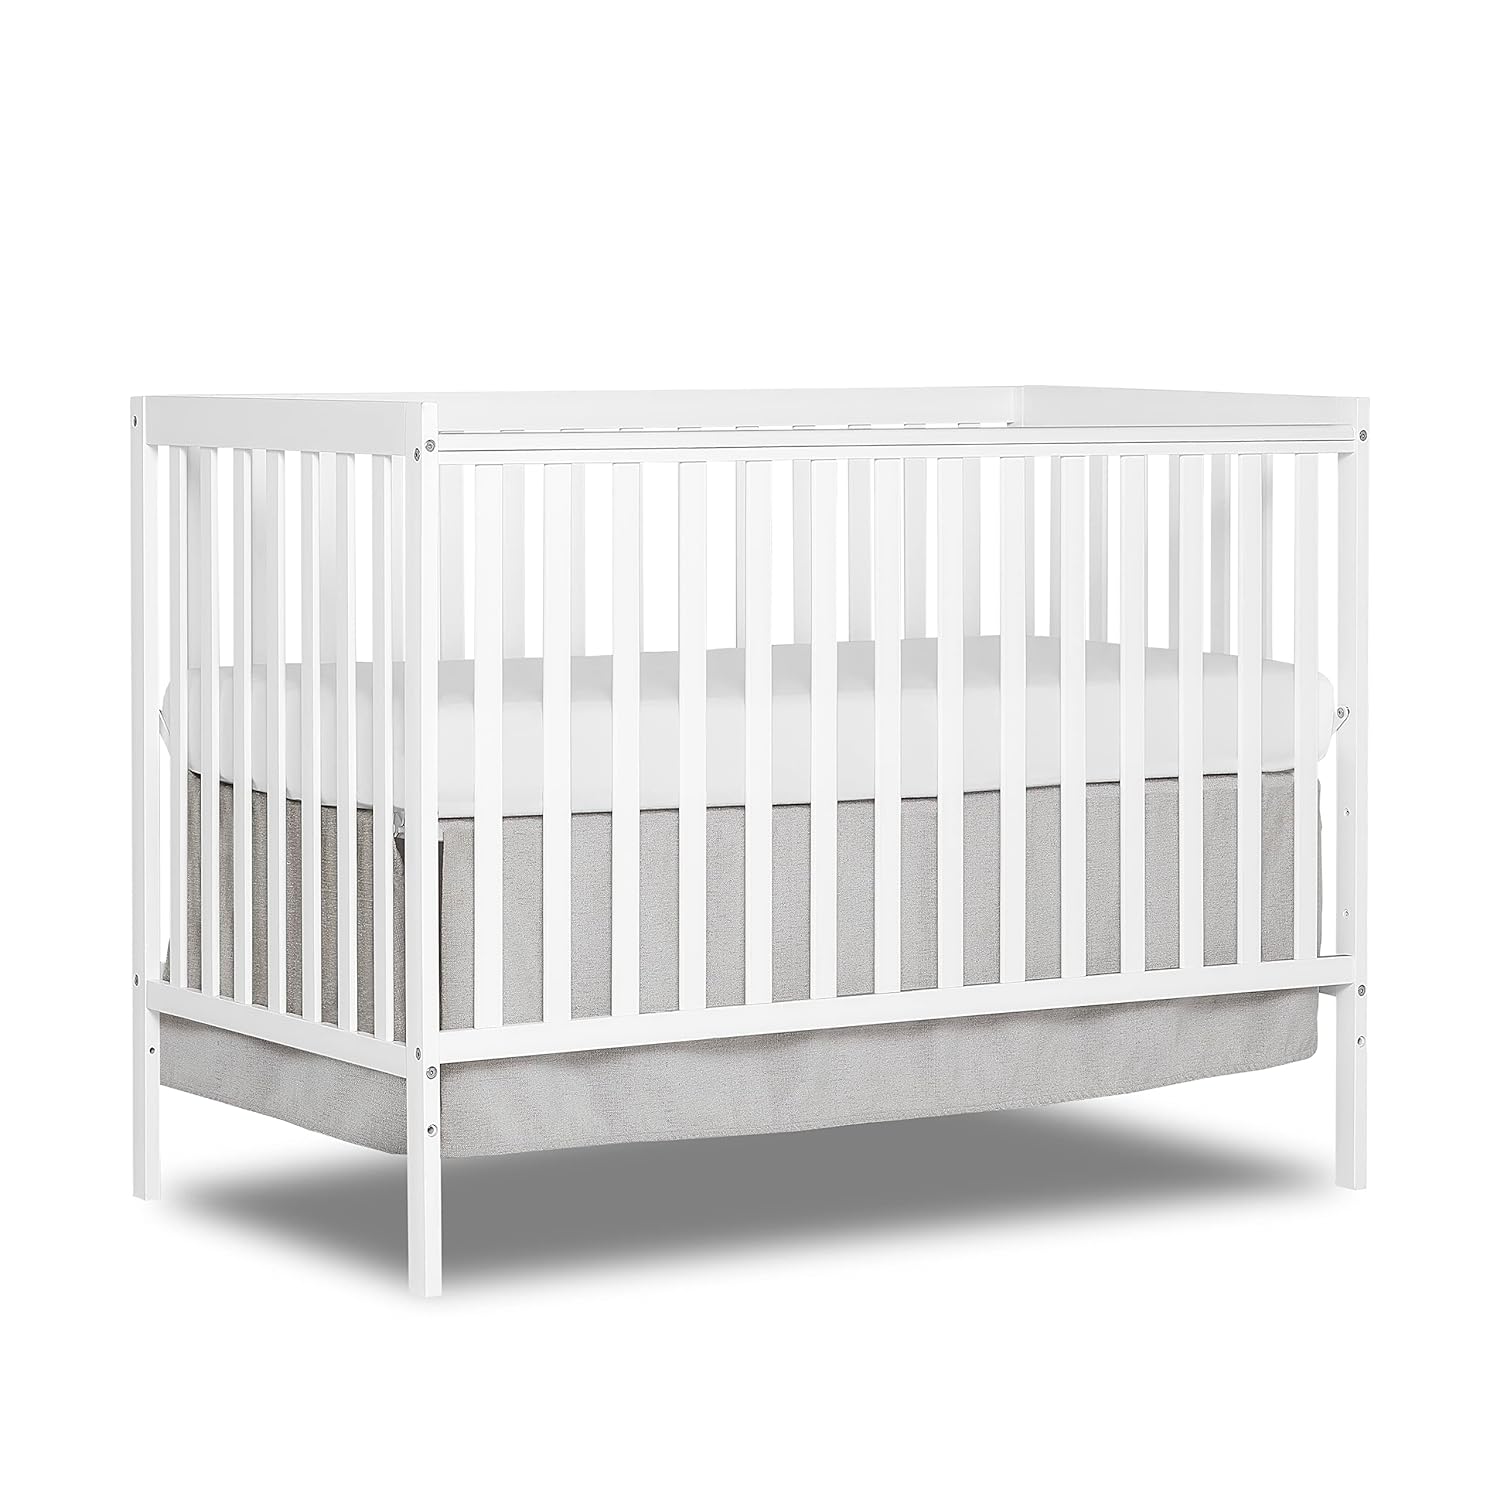 Best Bed for Babies: Top Picks for Your Little One's Comfort